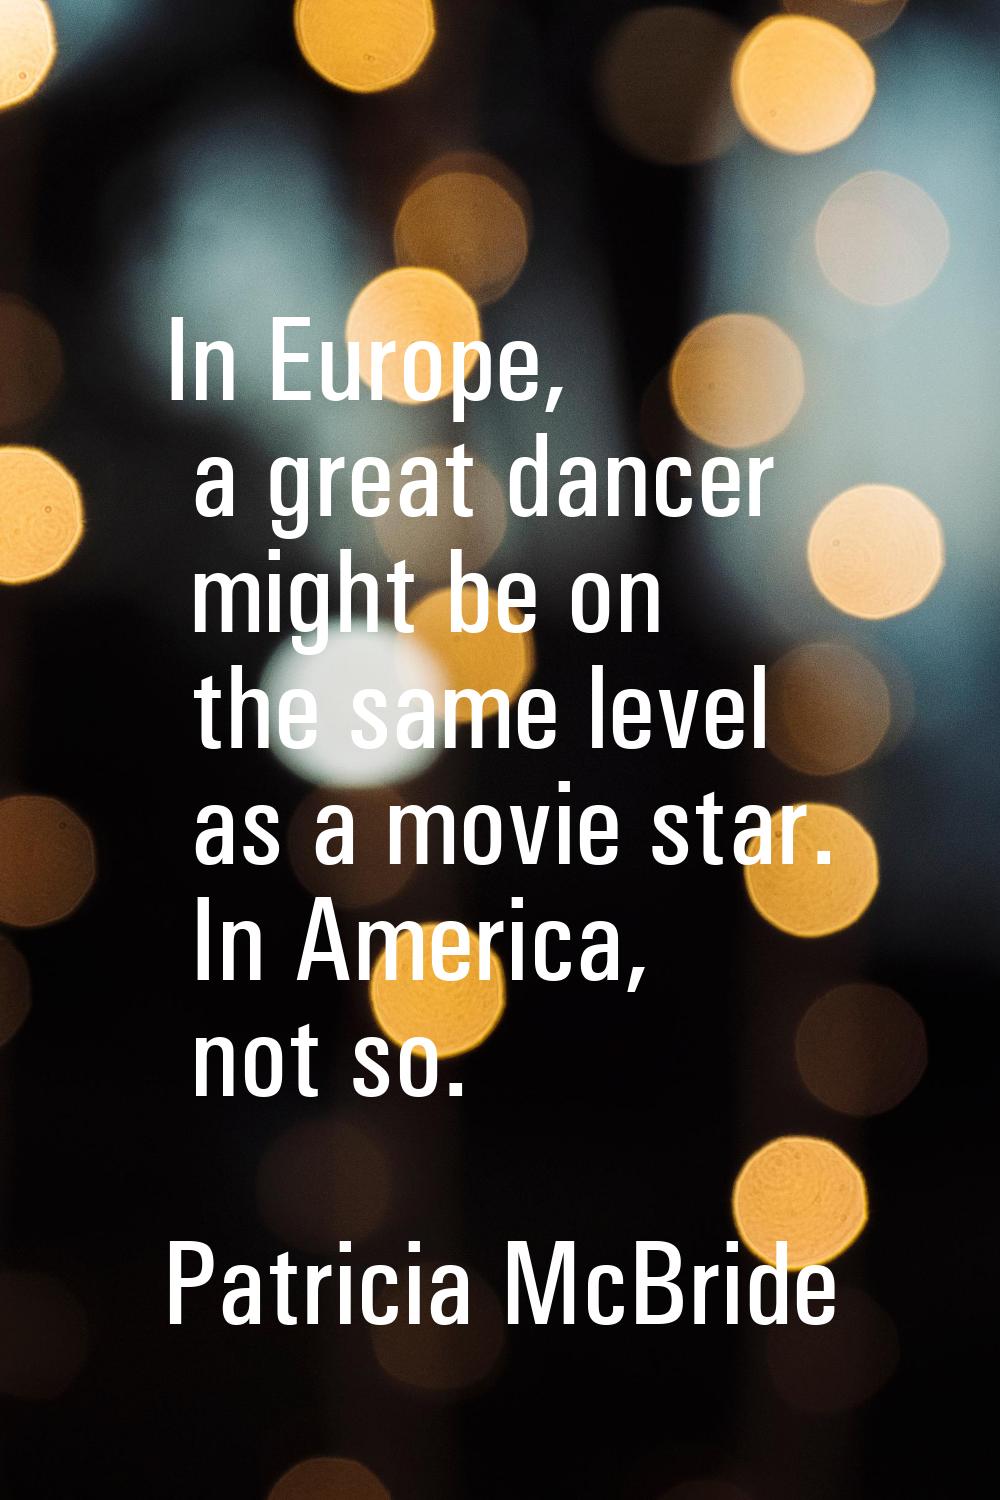 In Europe, a great dancer might be on the same level as a movie star. In America, not so.